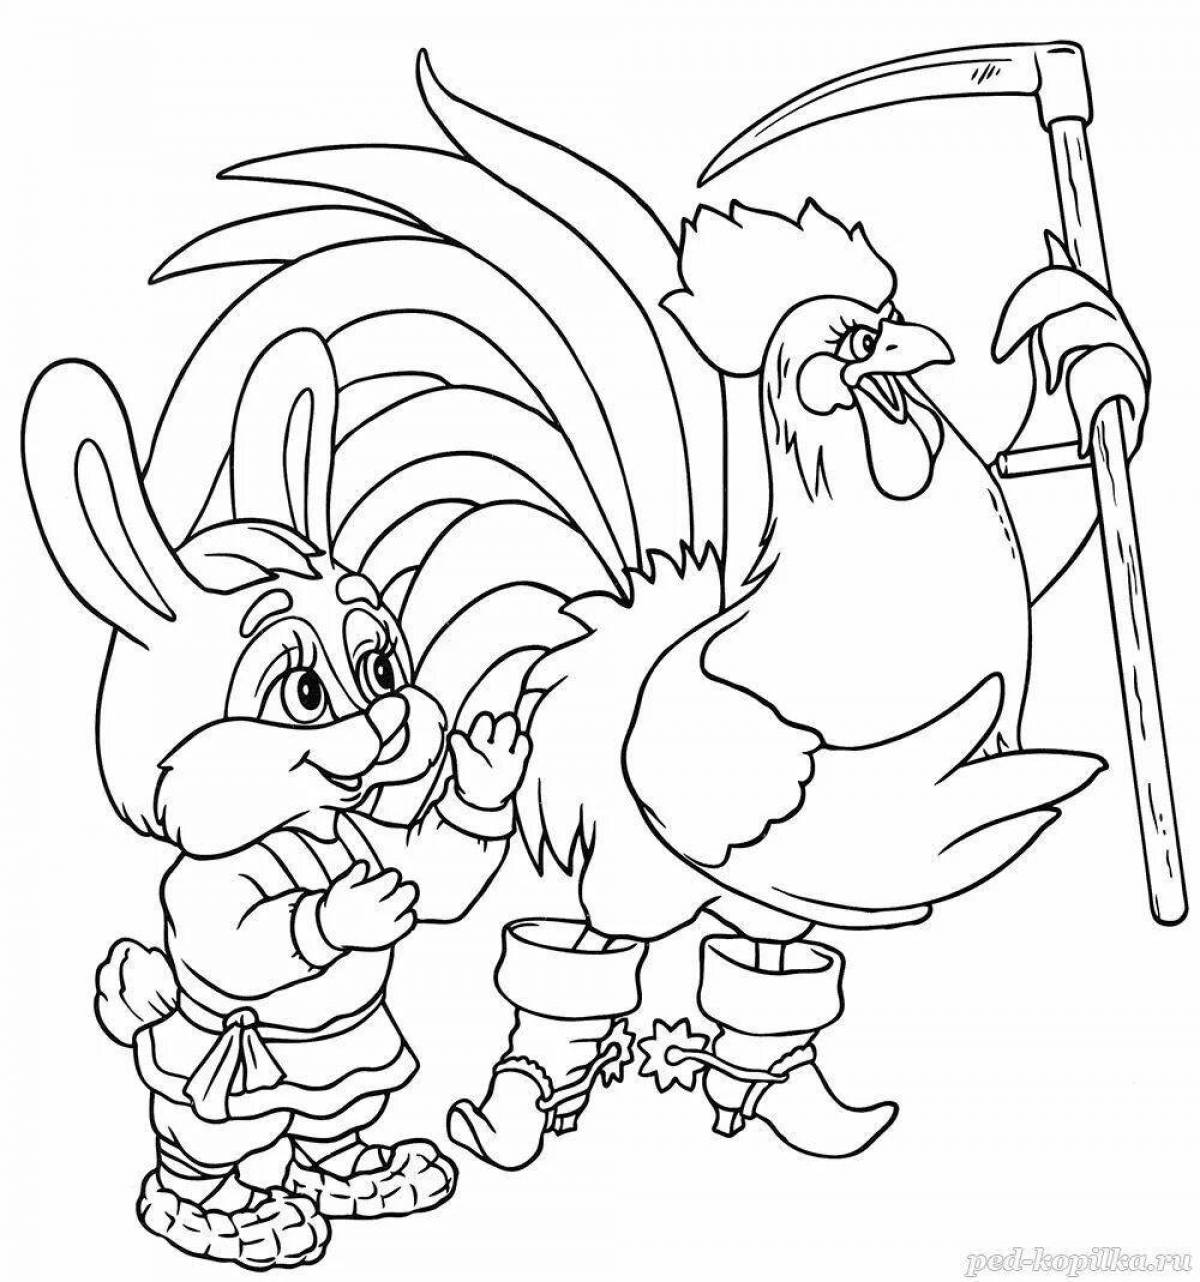 Wonderful coloring pages heroes of Russian folk tales